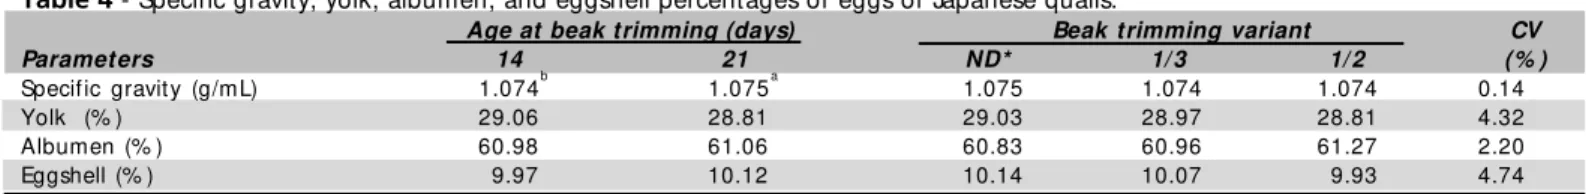 Table 4  - Specific gravity, yolk, albumen, and eggshell percentages of eggs of Japanese quails.